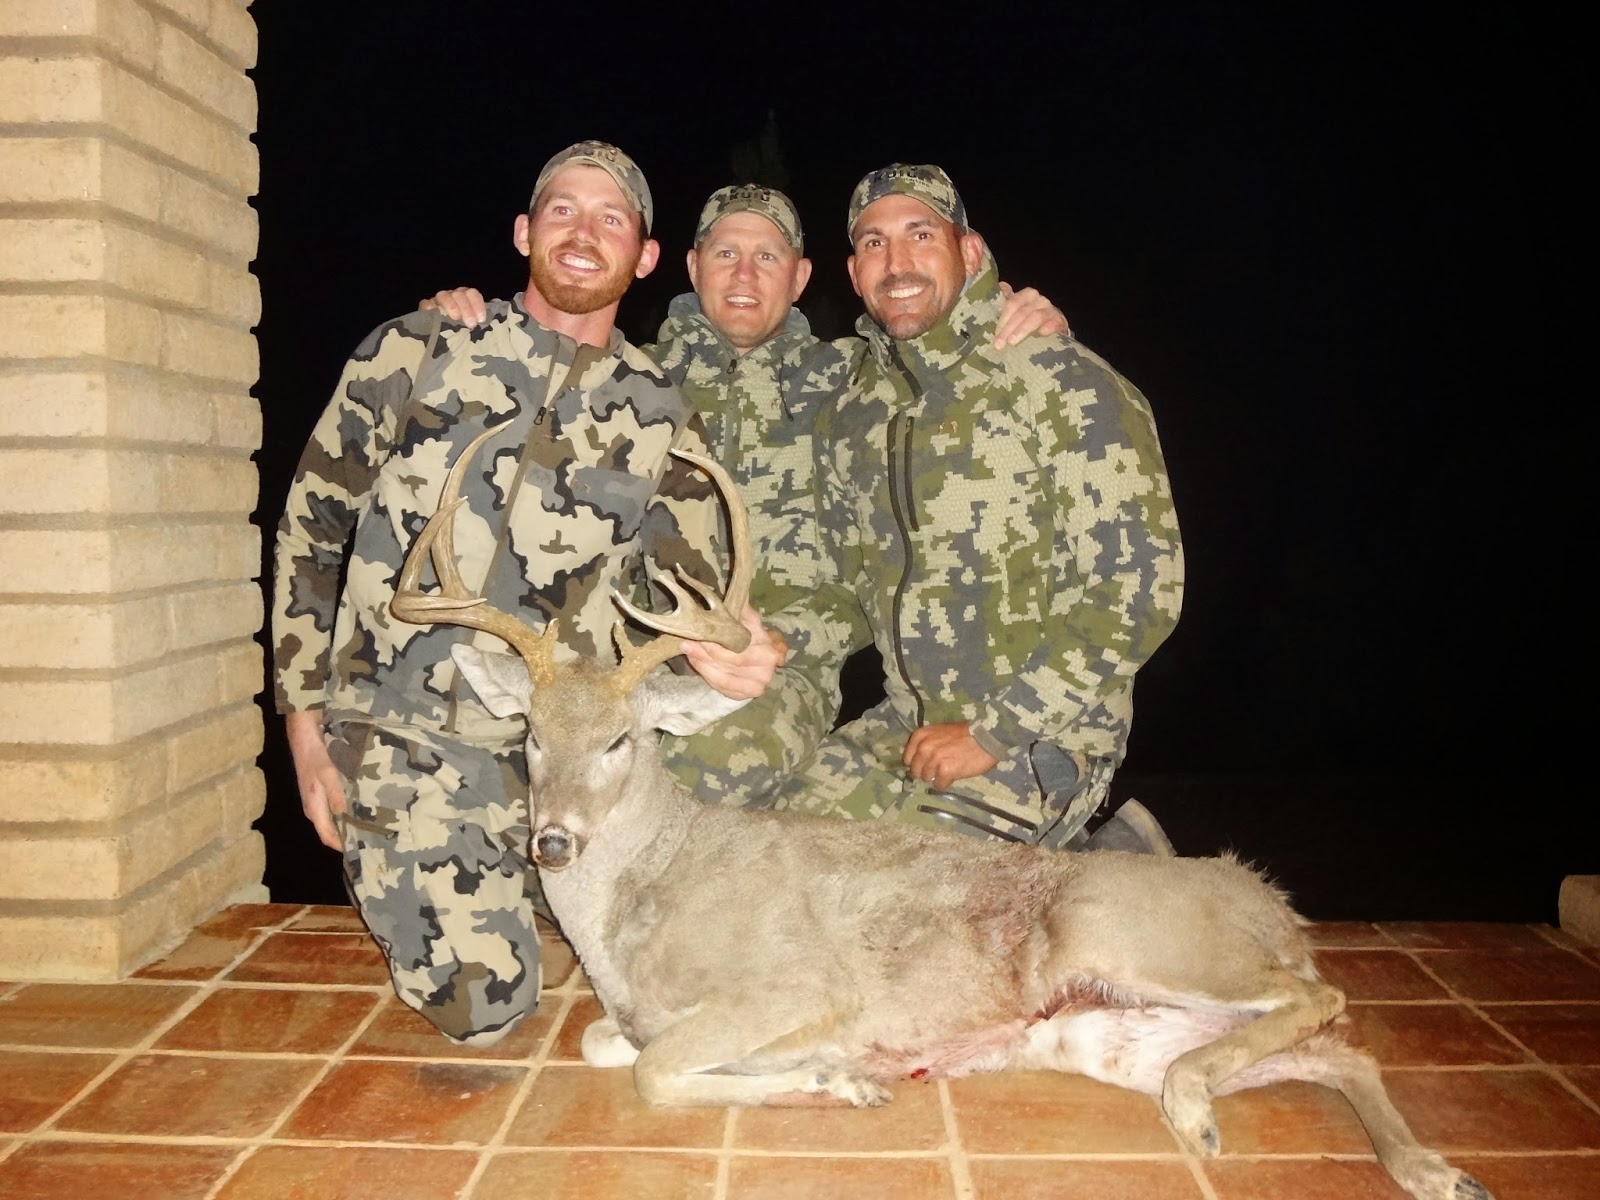 Giant+Archery+Coues+Deer+Photo+with+Brady+Miller+and+the+KUIU+guys+Colburn+and+Scott+Outfitters.JPG